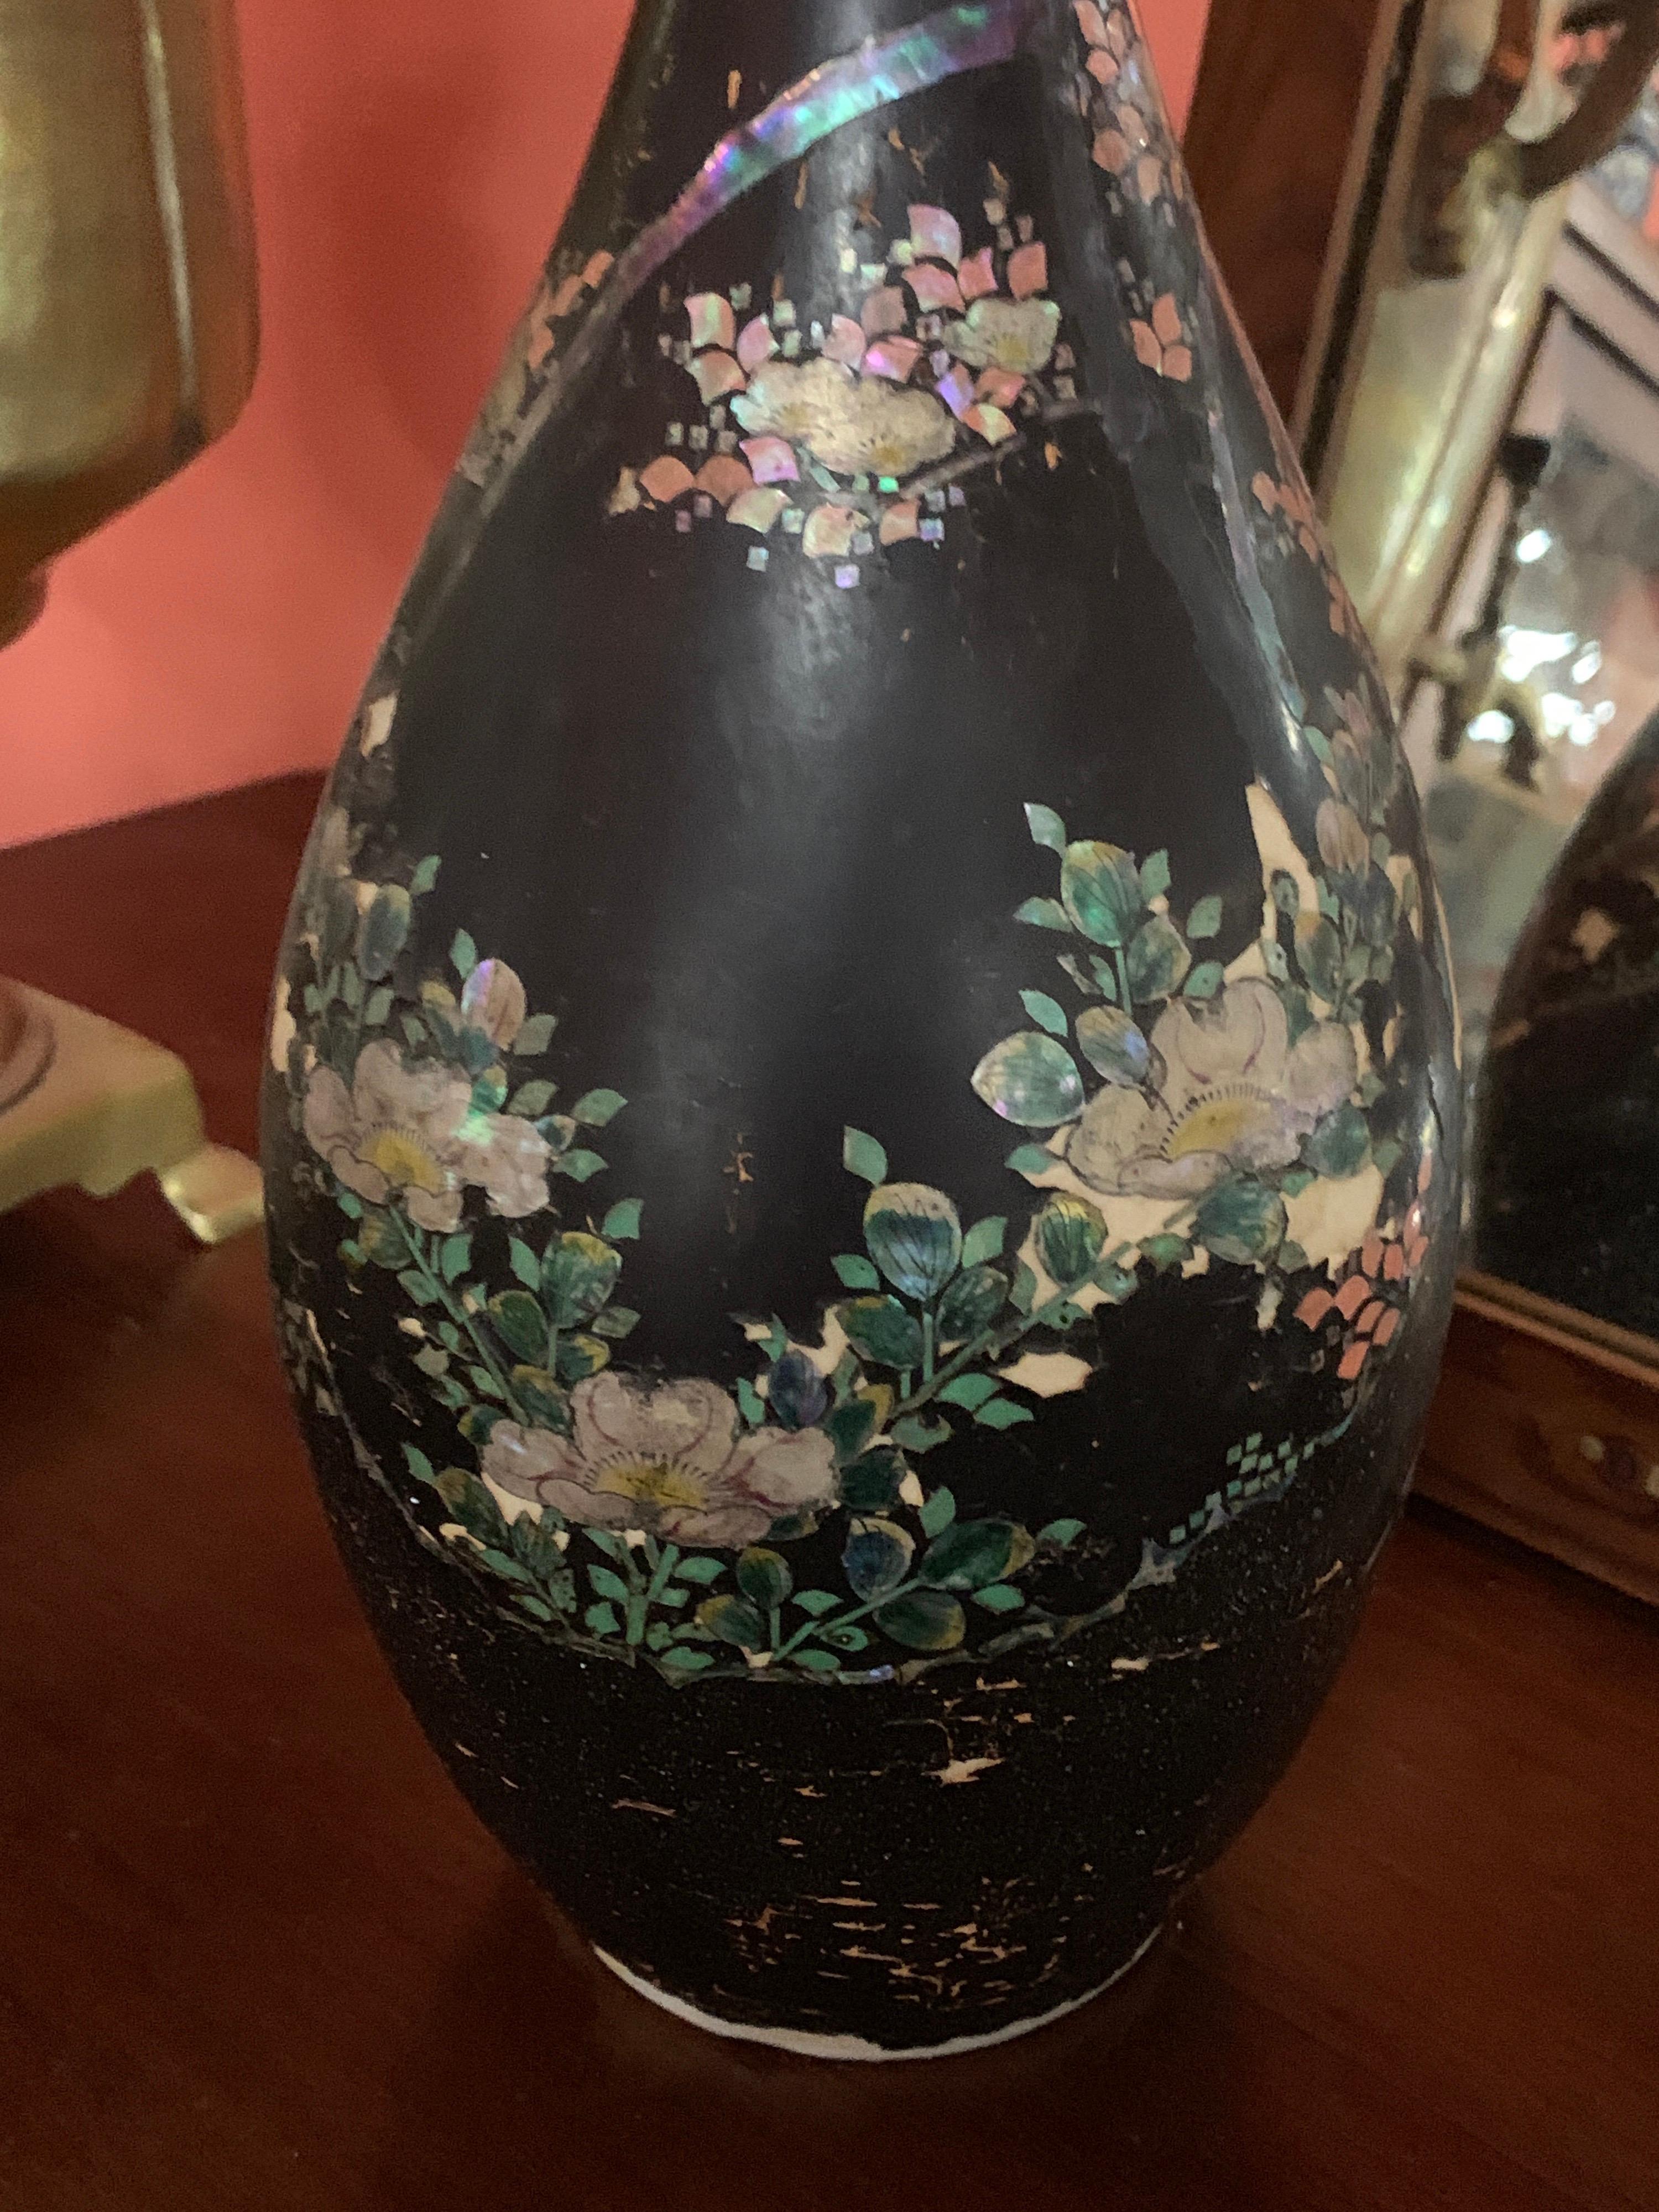 Mother of Pearl Fine Inlaid Black Porcelain Japanese Vase, circa 1870 (Anglo-japanisch)